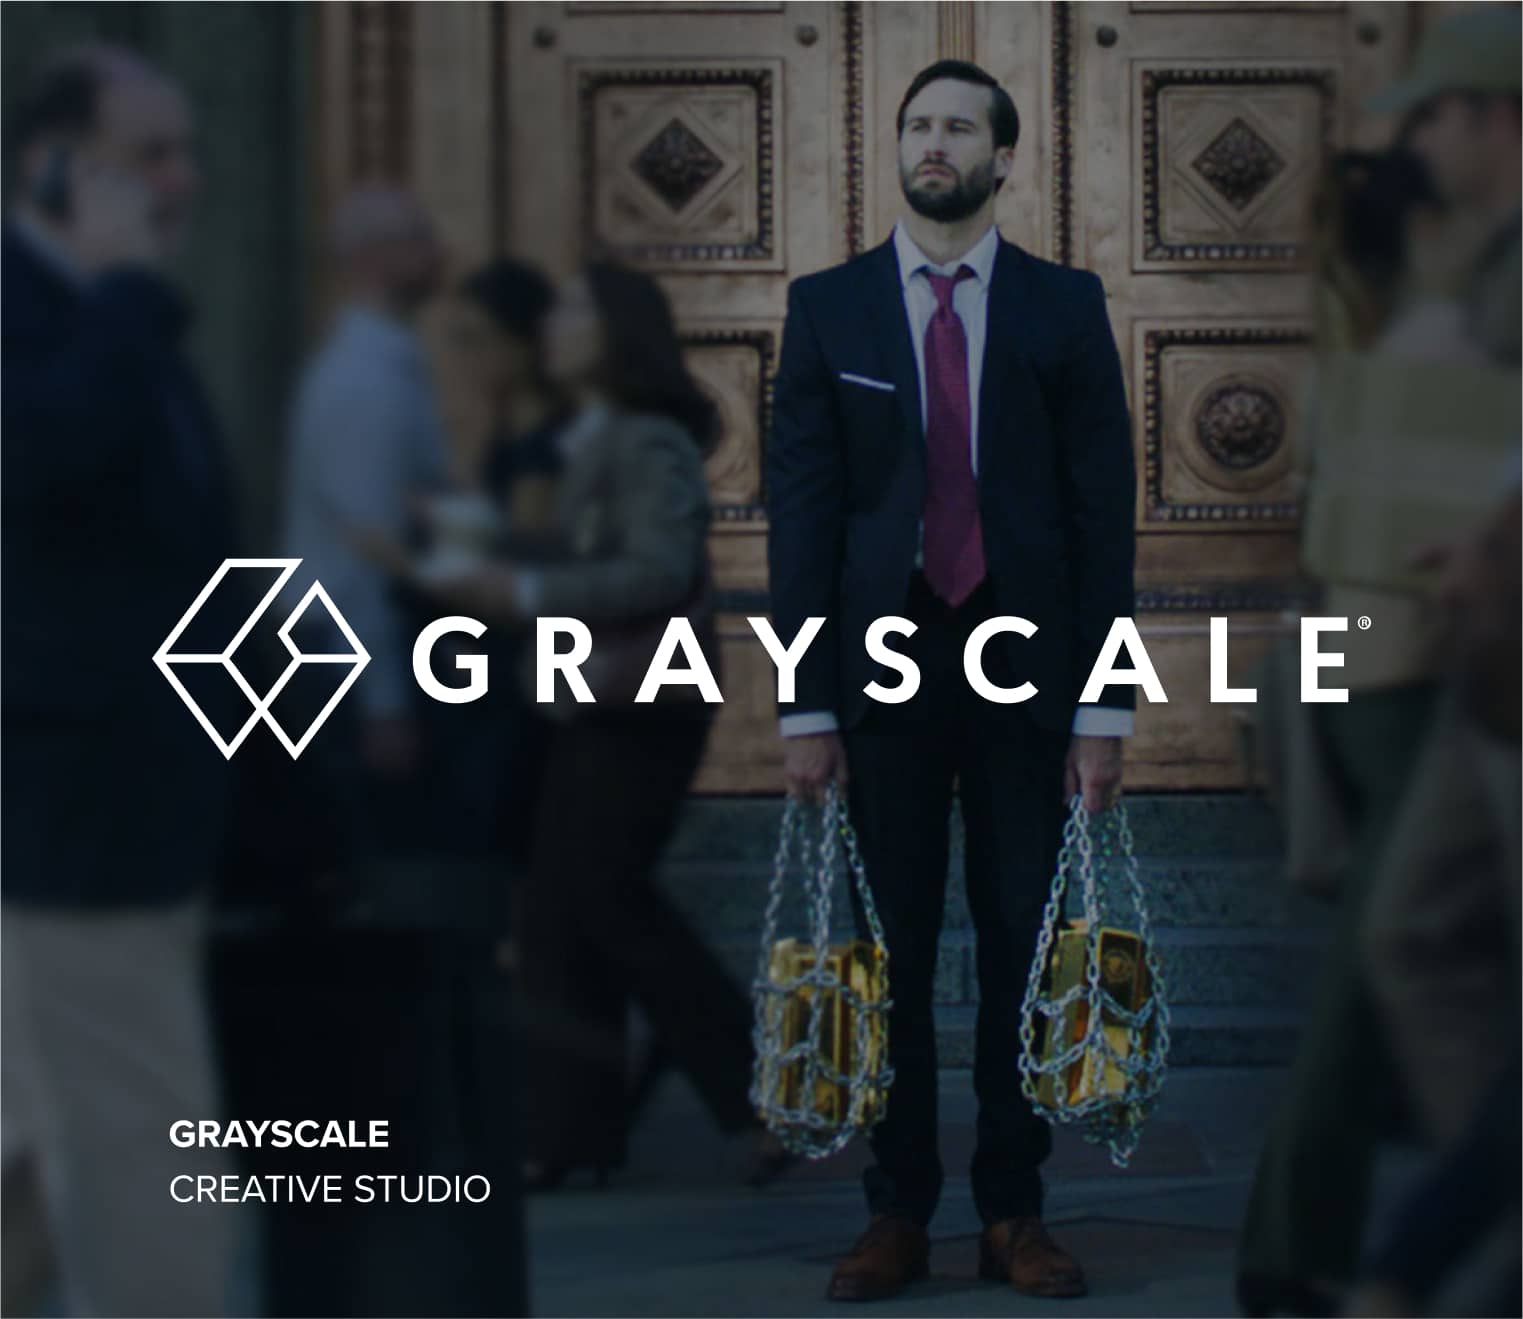 A visual logo for Grayscale Creative Studio showing a man in a business suit holding chain bags of books in front of an ornate door.